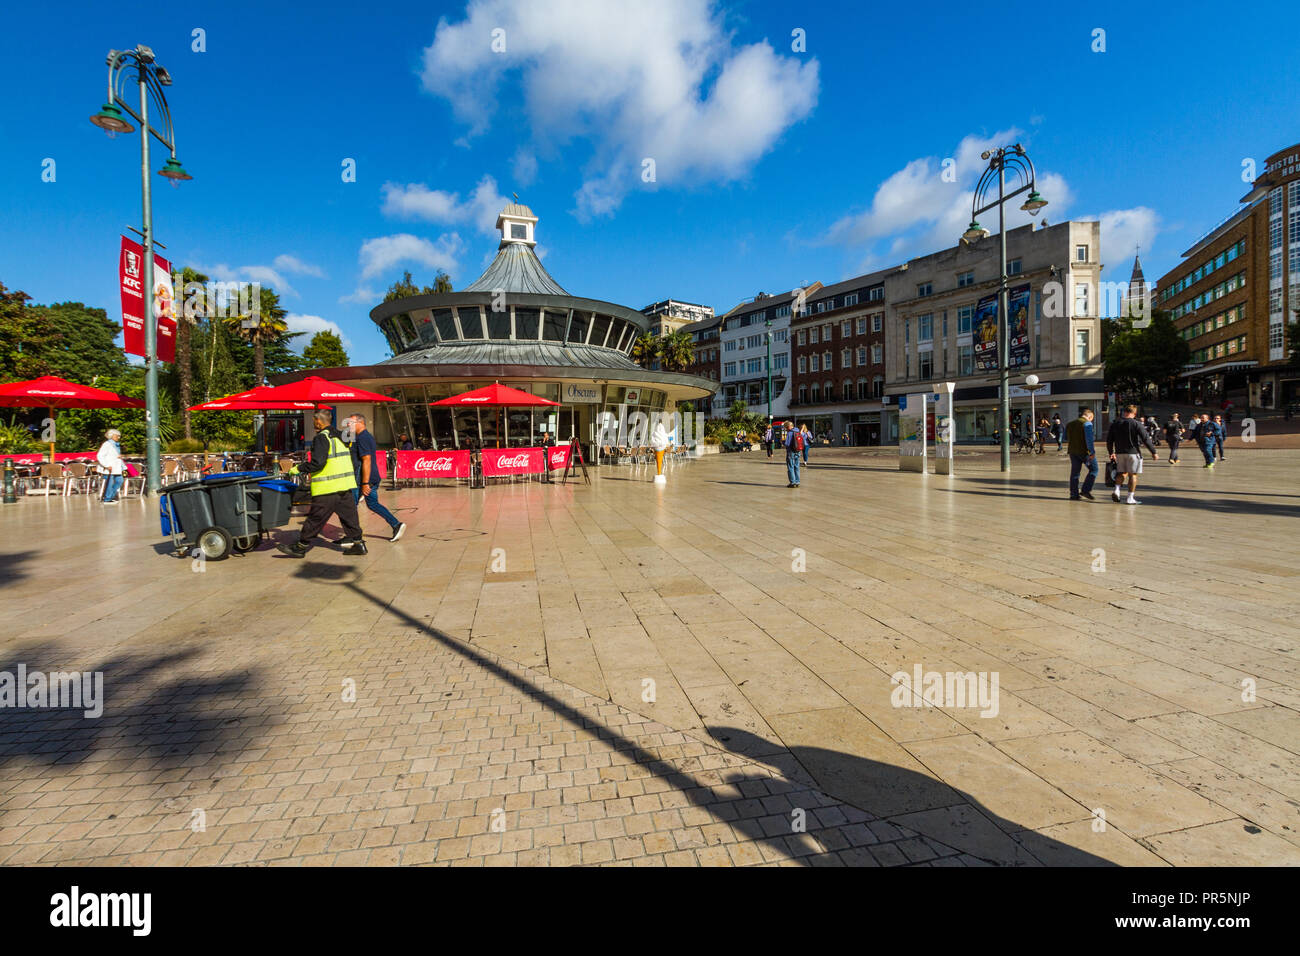 Bournemouth, United Kingdom – Bournemouth Square pedestrianised area on September 21 2018 in Bournemouth. Stock Photo